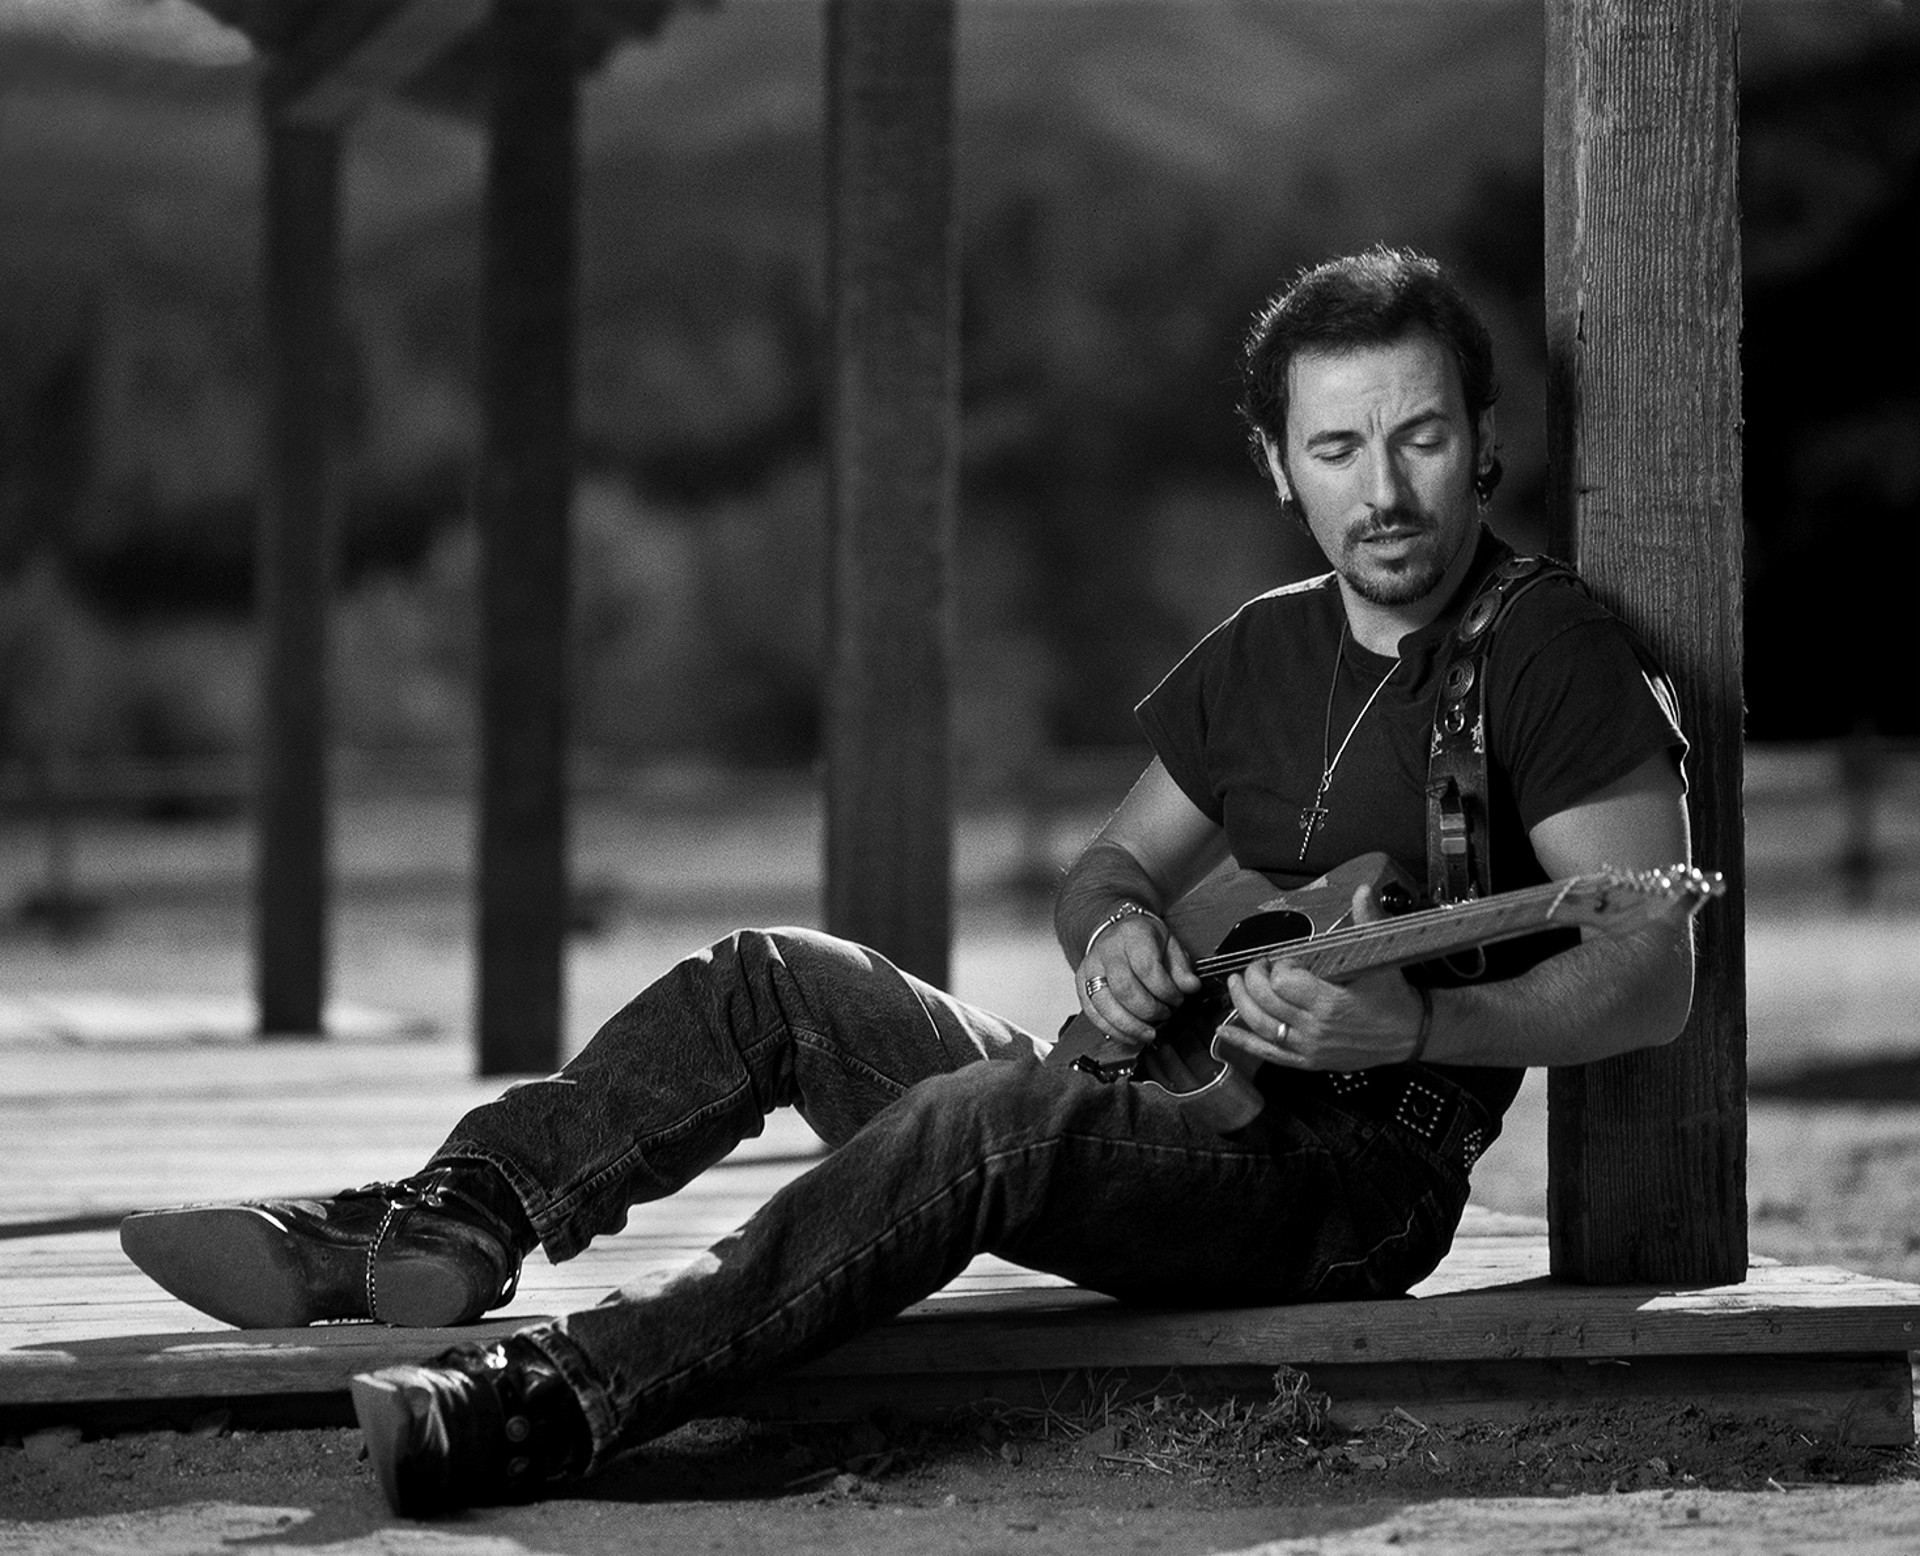 91152 Bruce Springsteen Playing Guitar Sitting Against Pillar BW by Timothy White